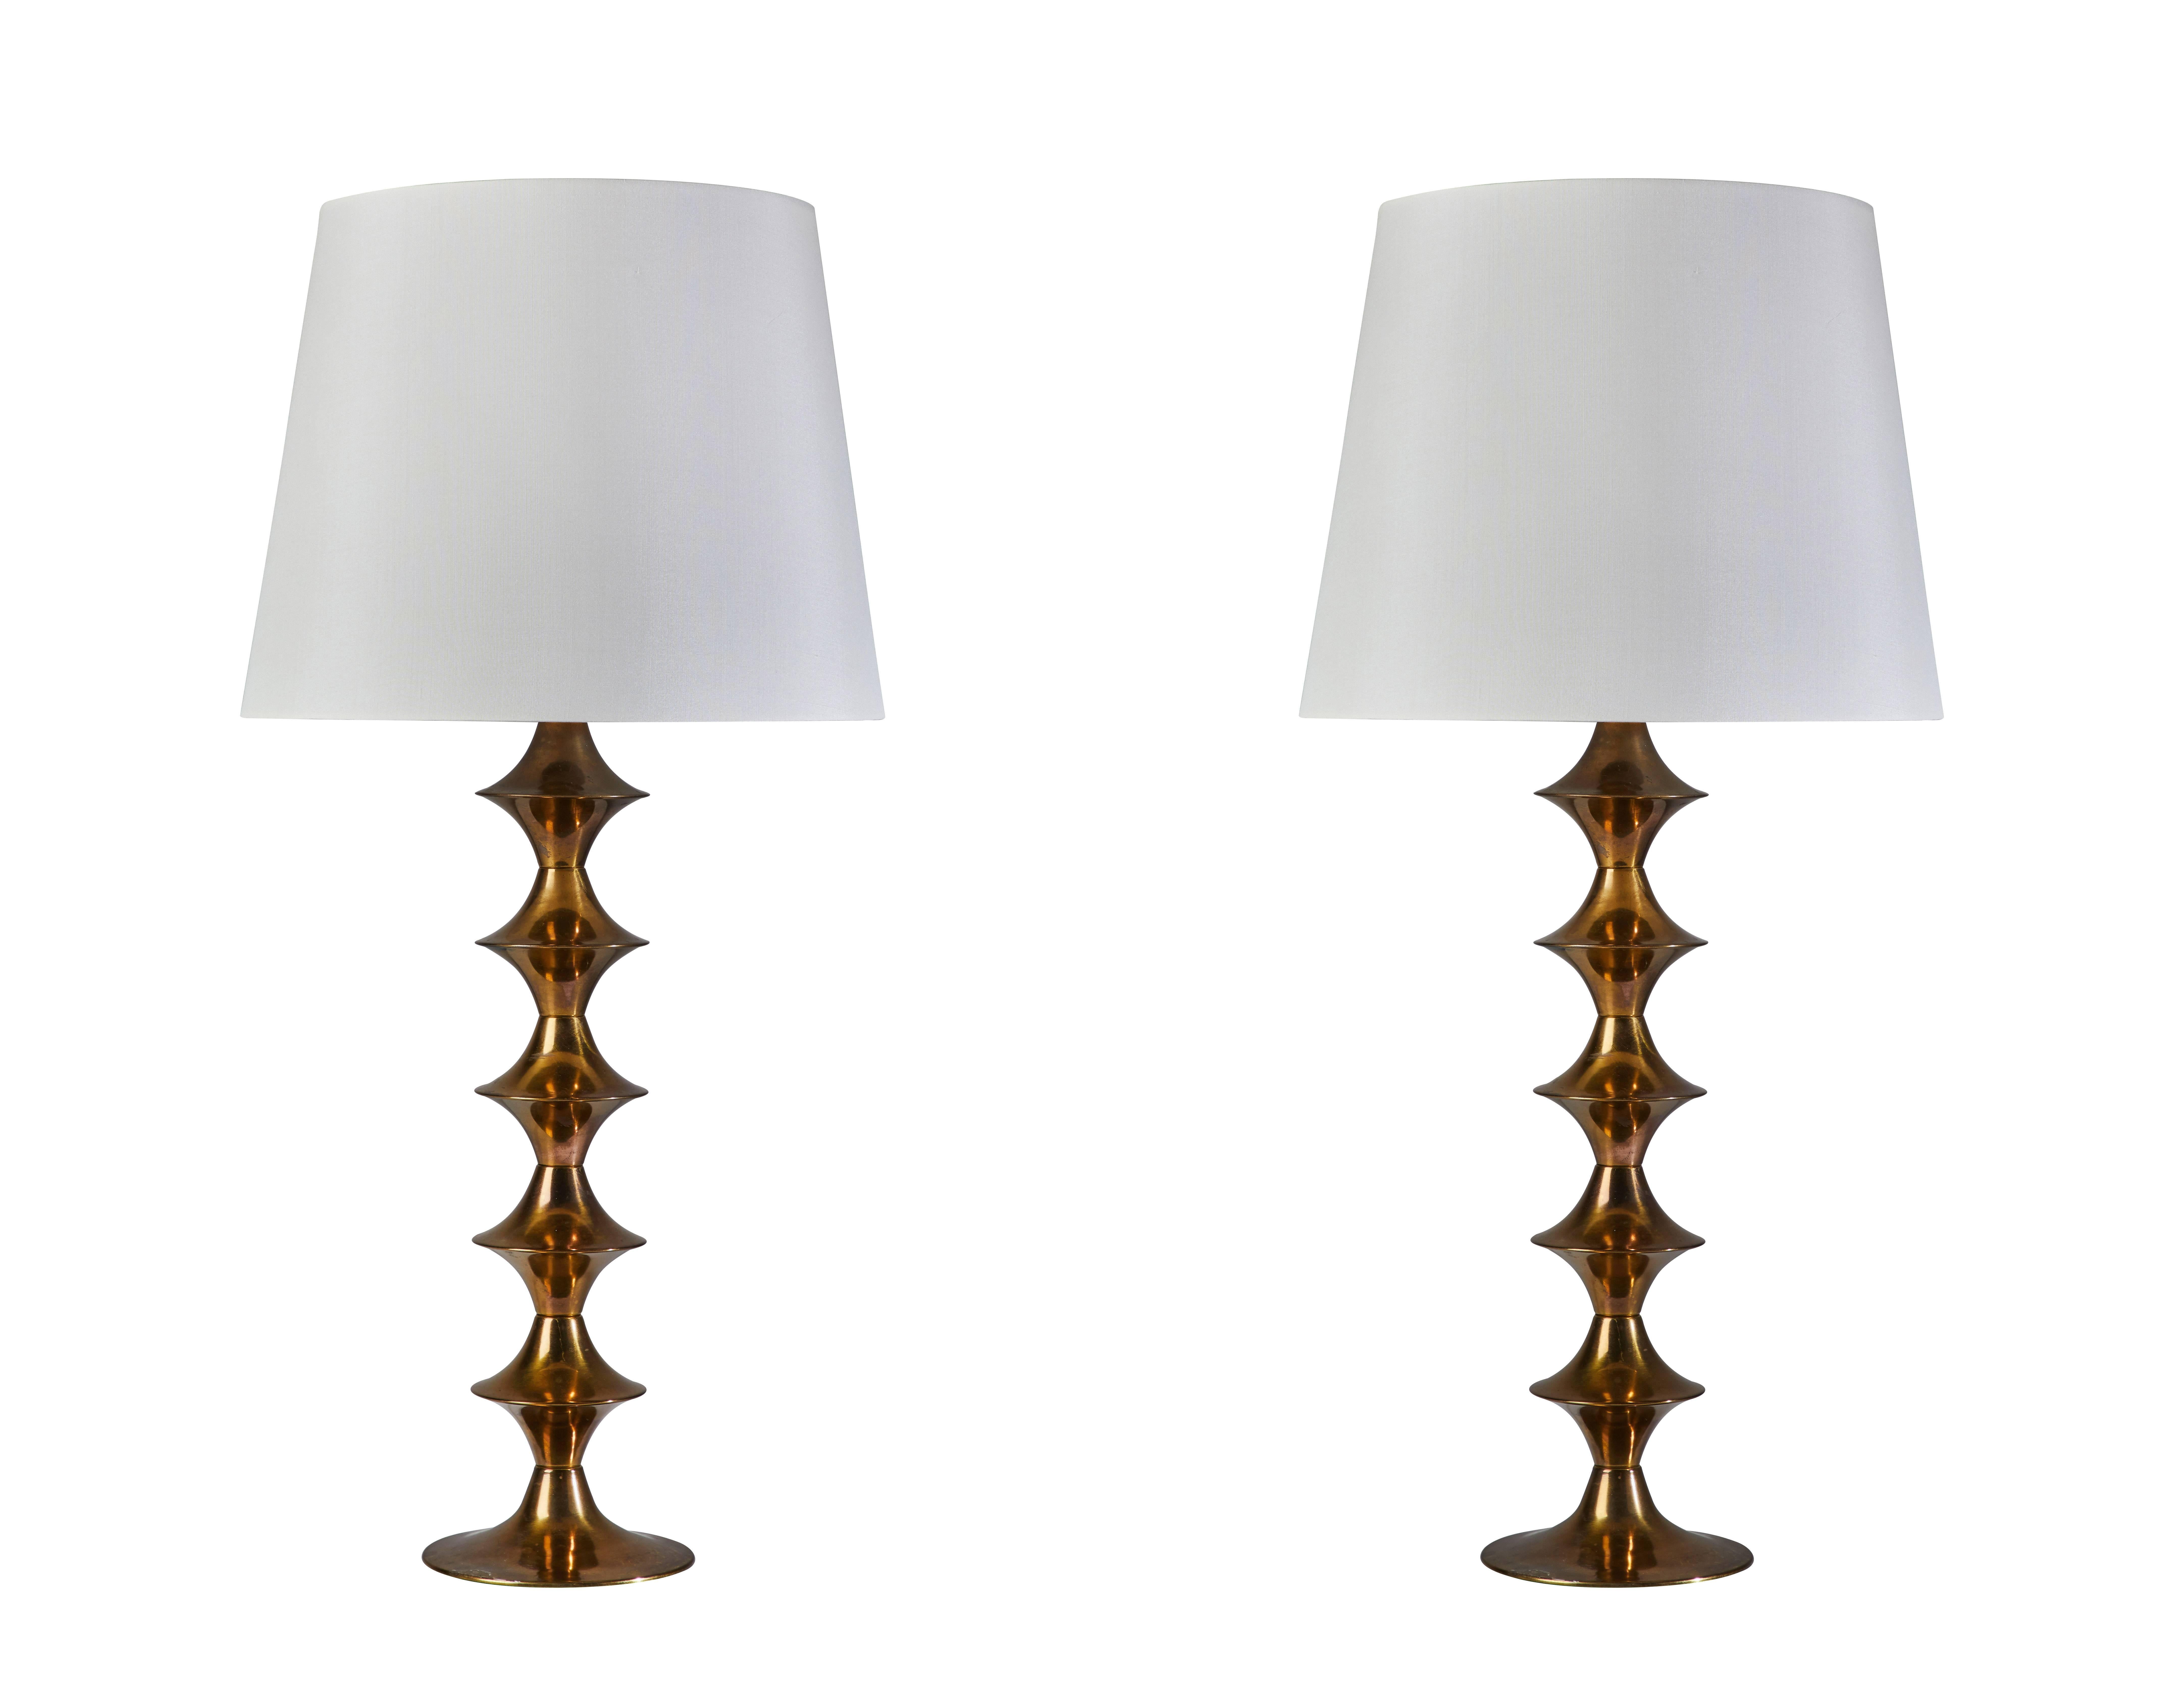 Pair of brass table lamps by Hans-Agne Jakobsson designed and manufactured in Sweden, circa 1950s. Patinated brass stems with custom fabricated silk shades. Original cords. Each light takes one E27 75w maximum bulb. Shade is 13 inches H x 16 inches